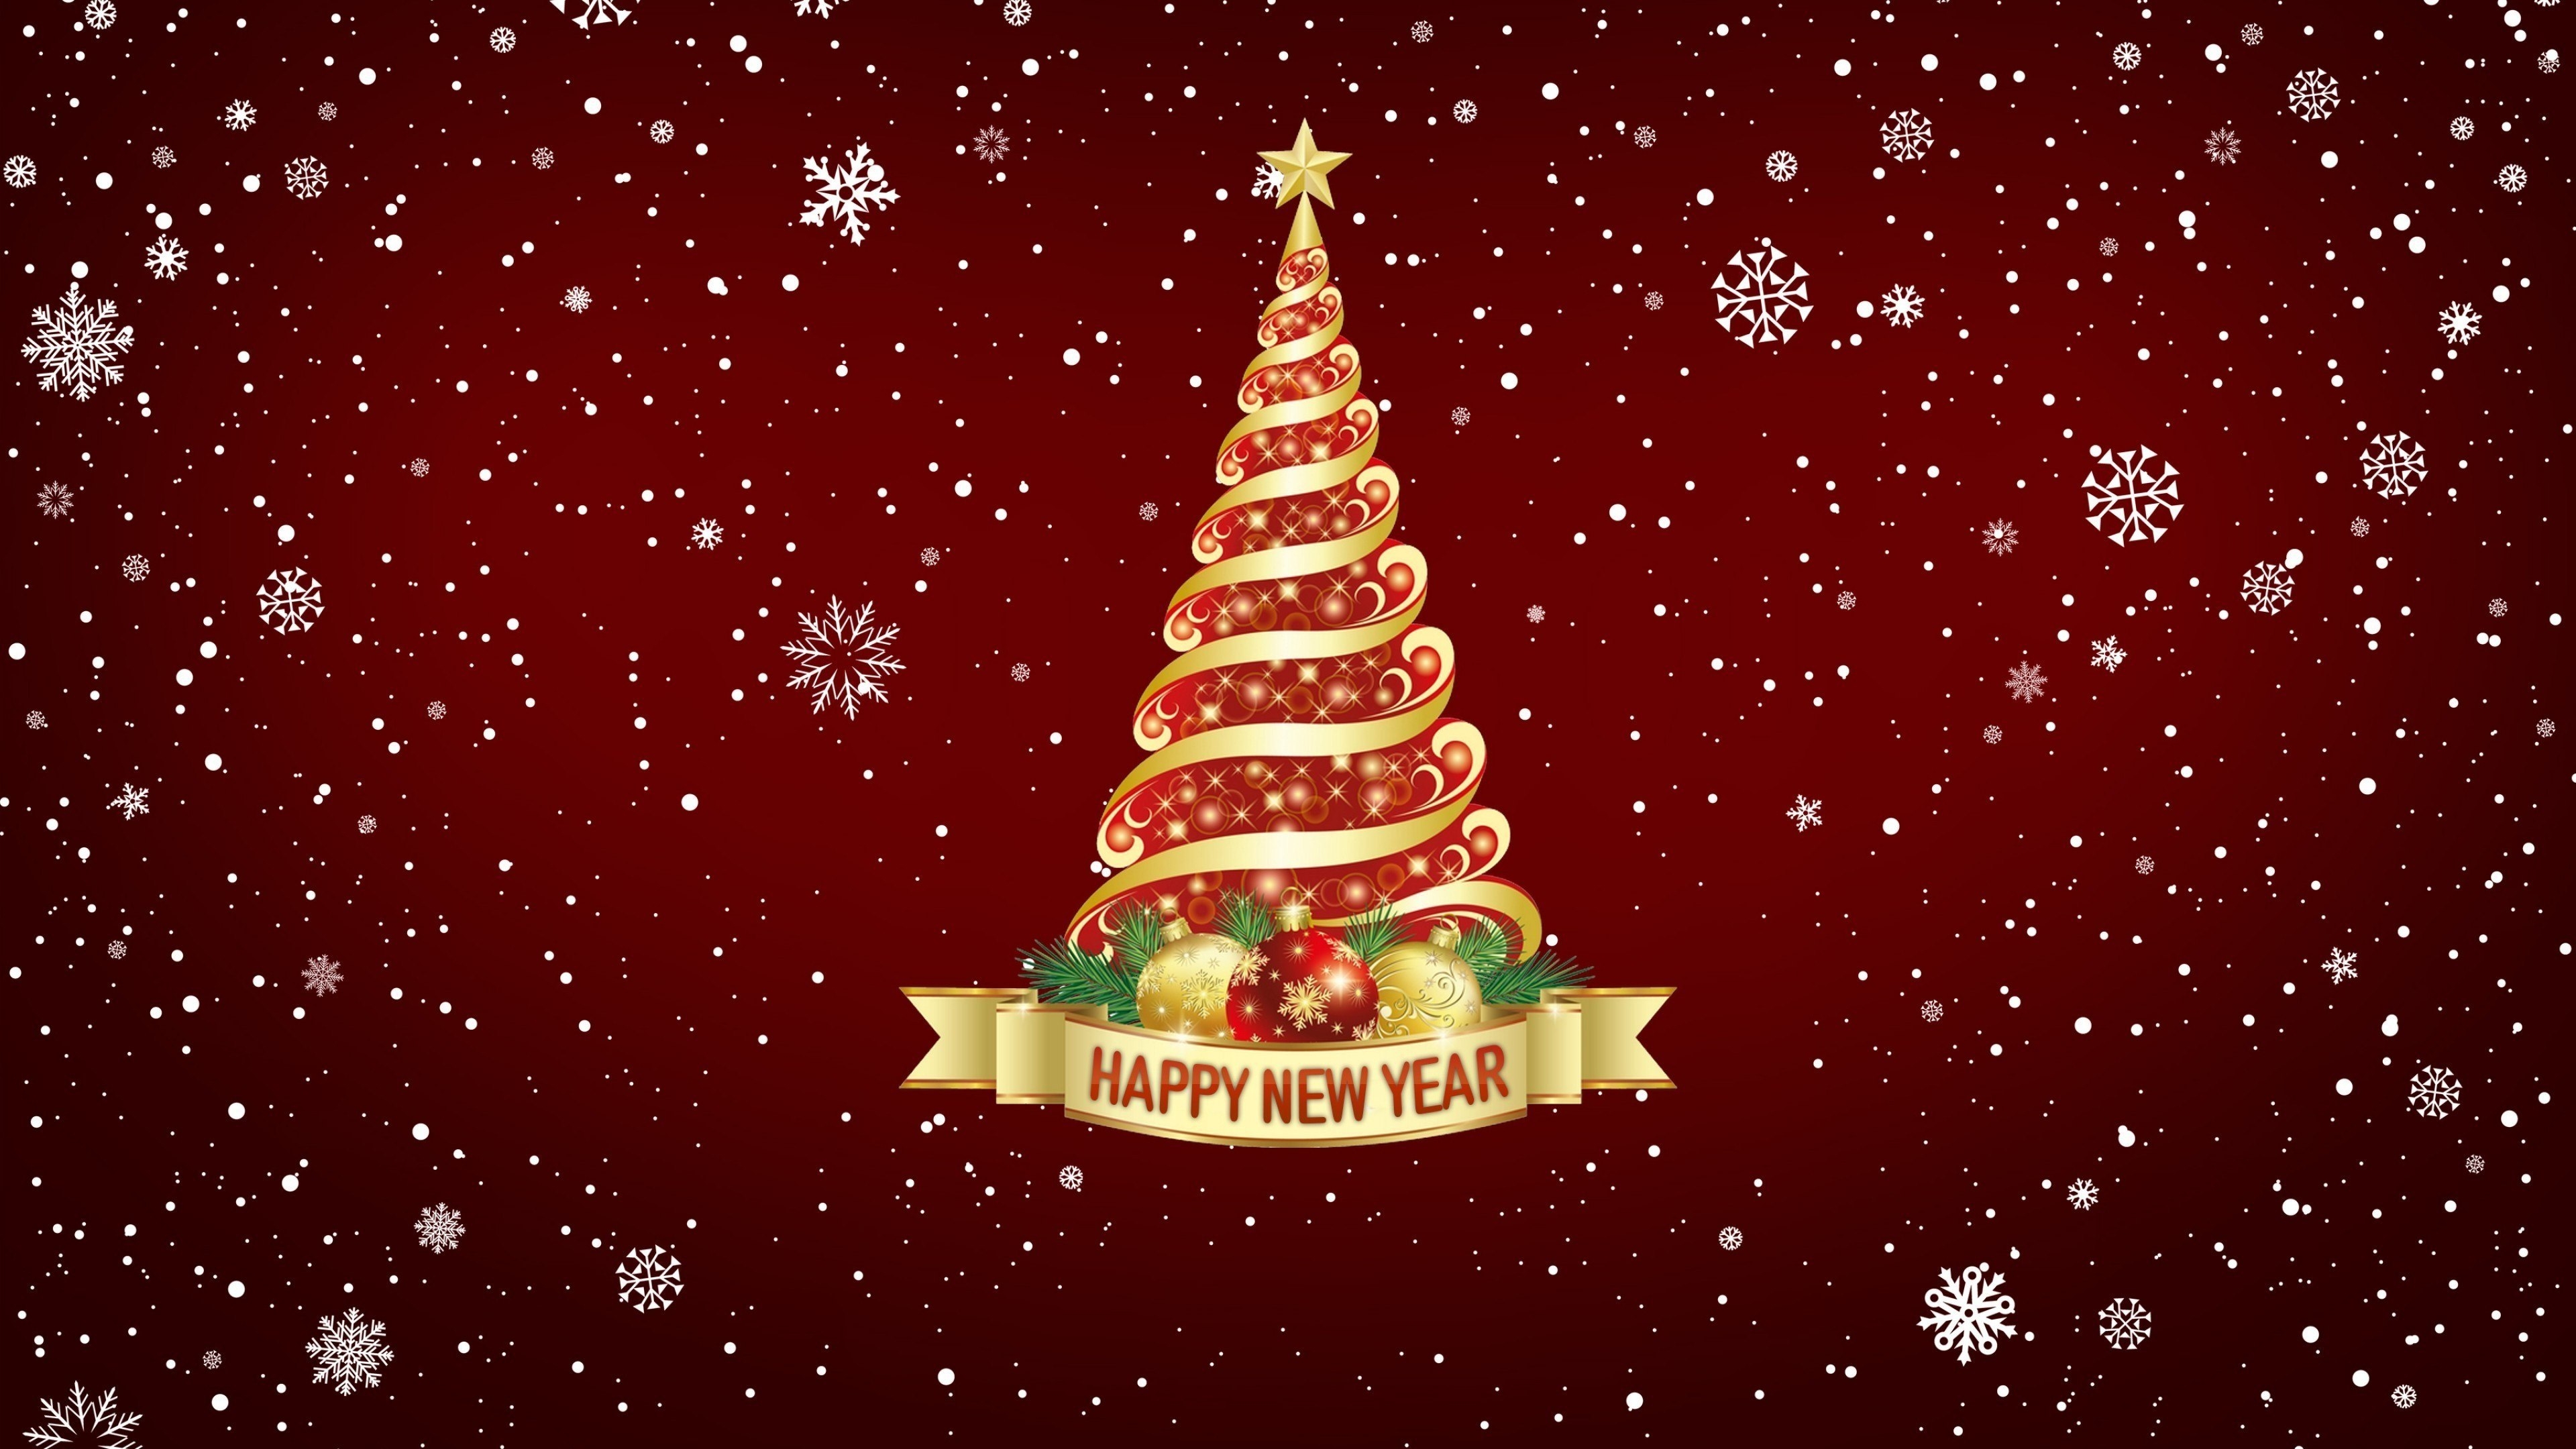 Wallpapers happy new year 2020 christmas tree snow on the desktop